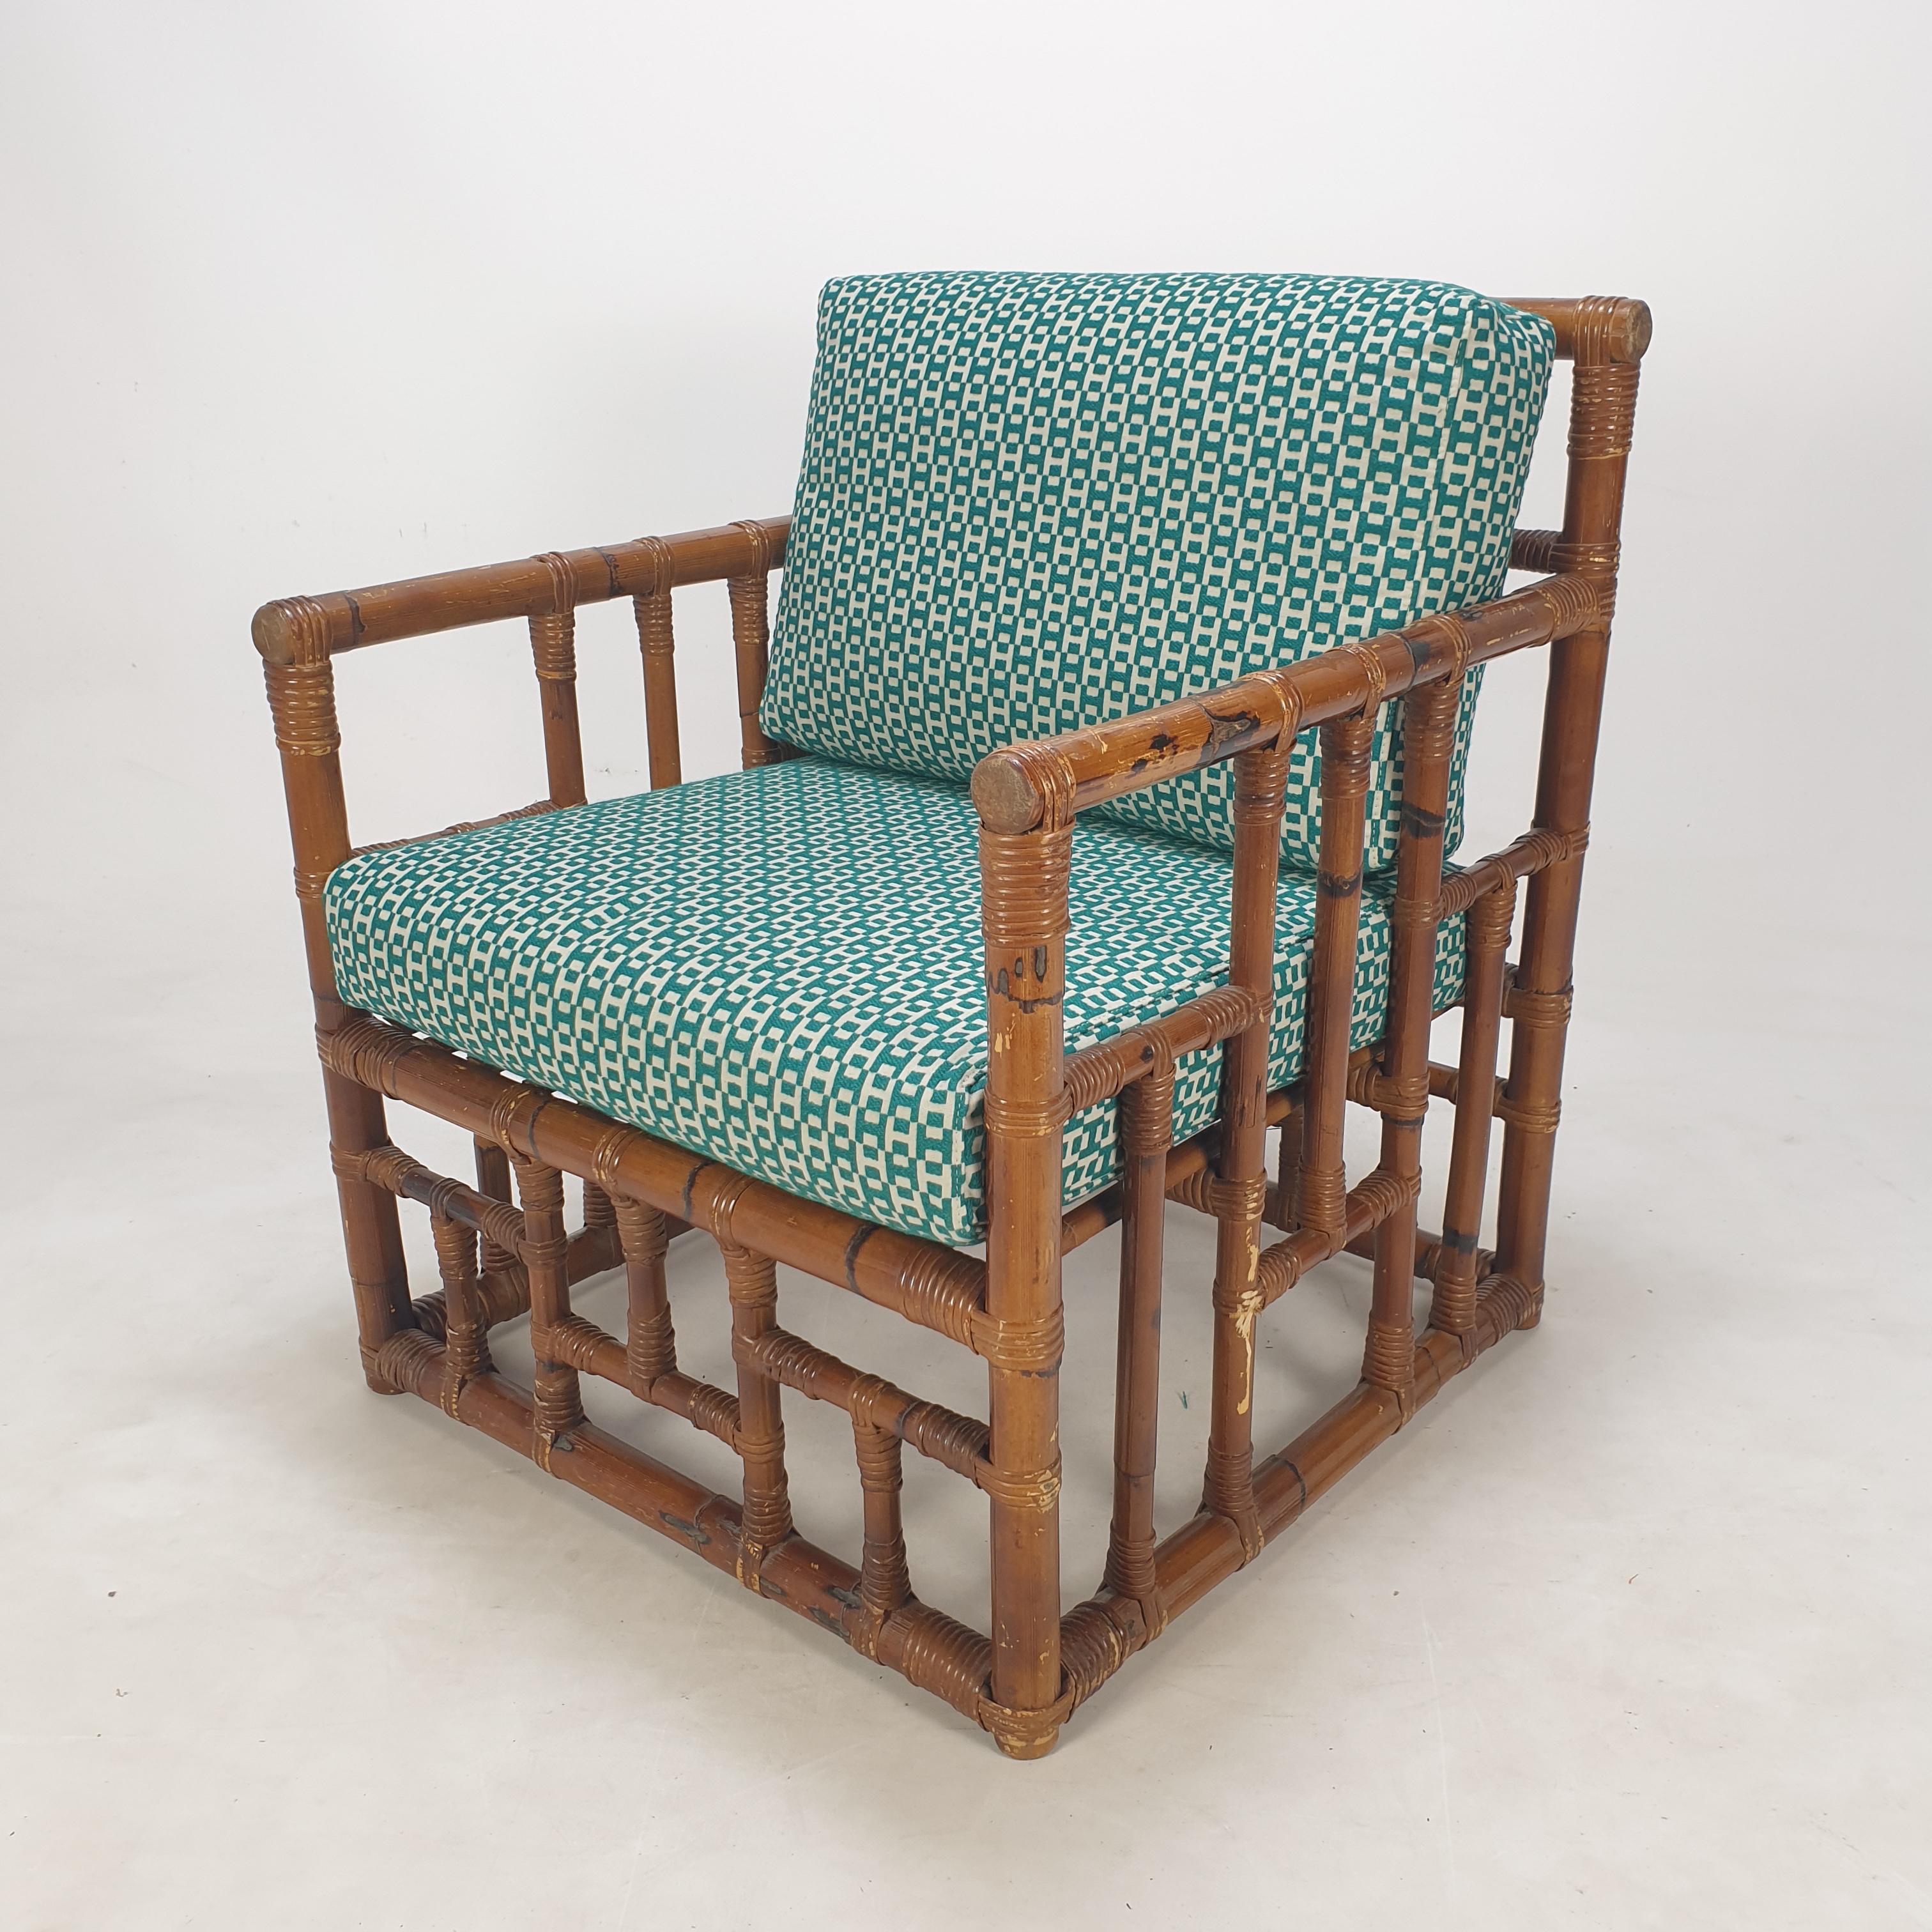 Pair of Italian Bamboo Lounge Chairs with Hermès Upholstery, 1970's For Sale 7